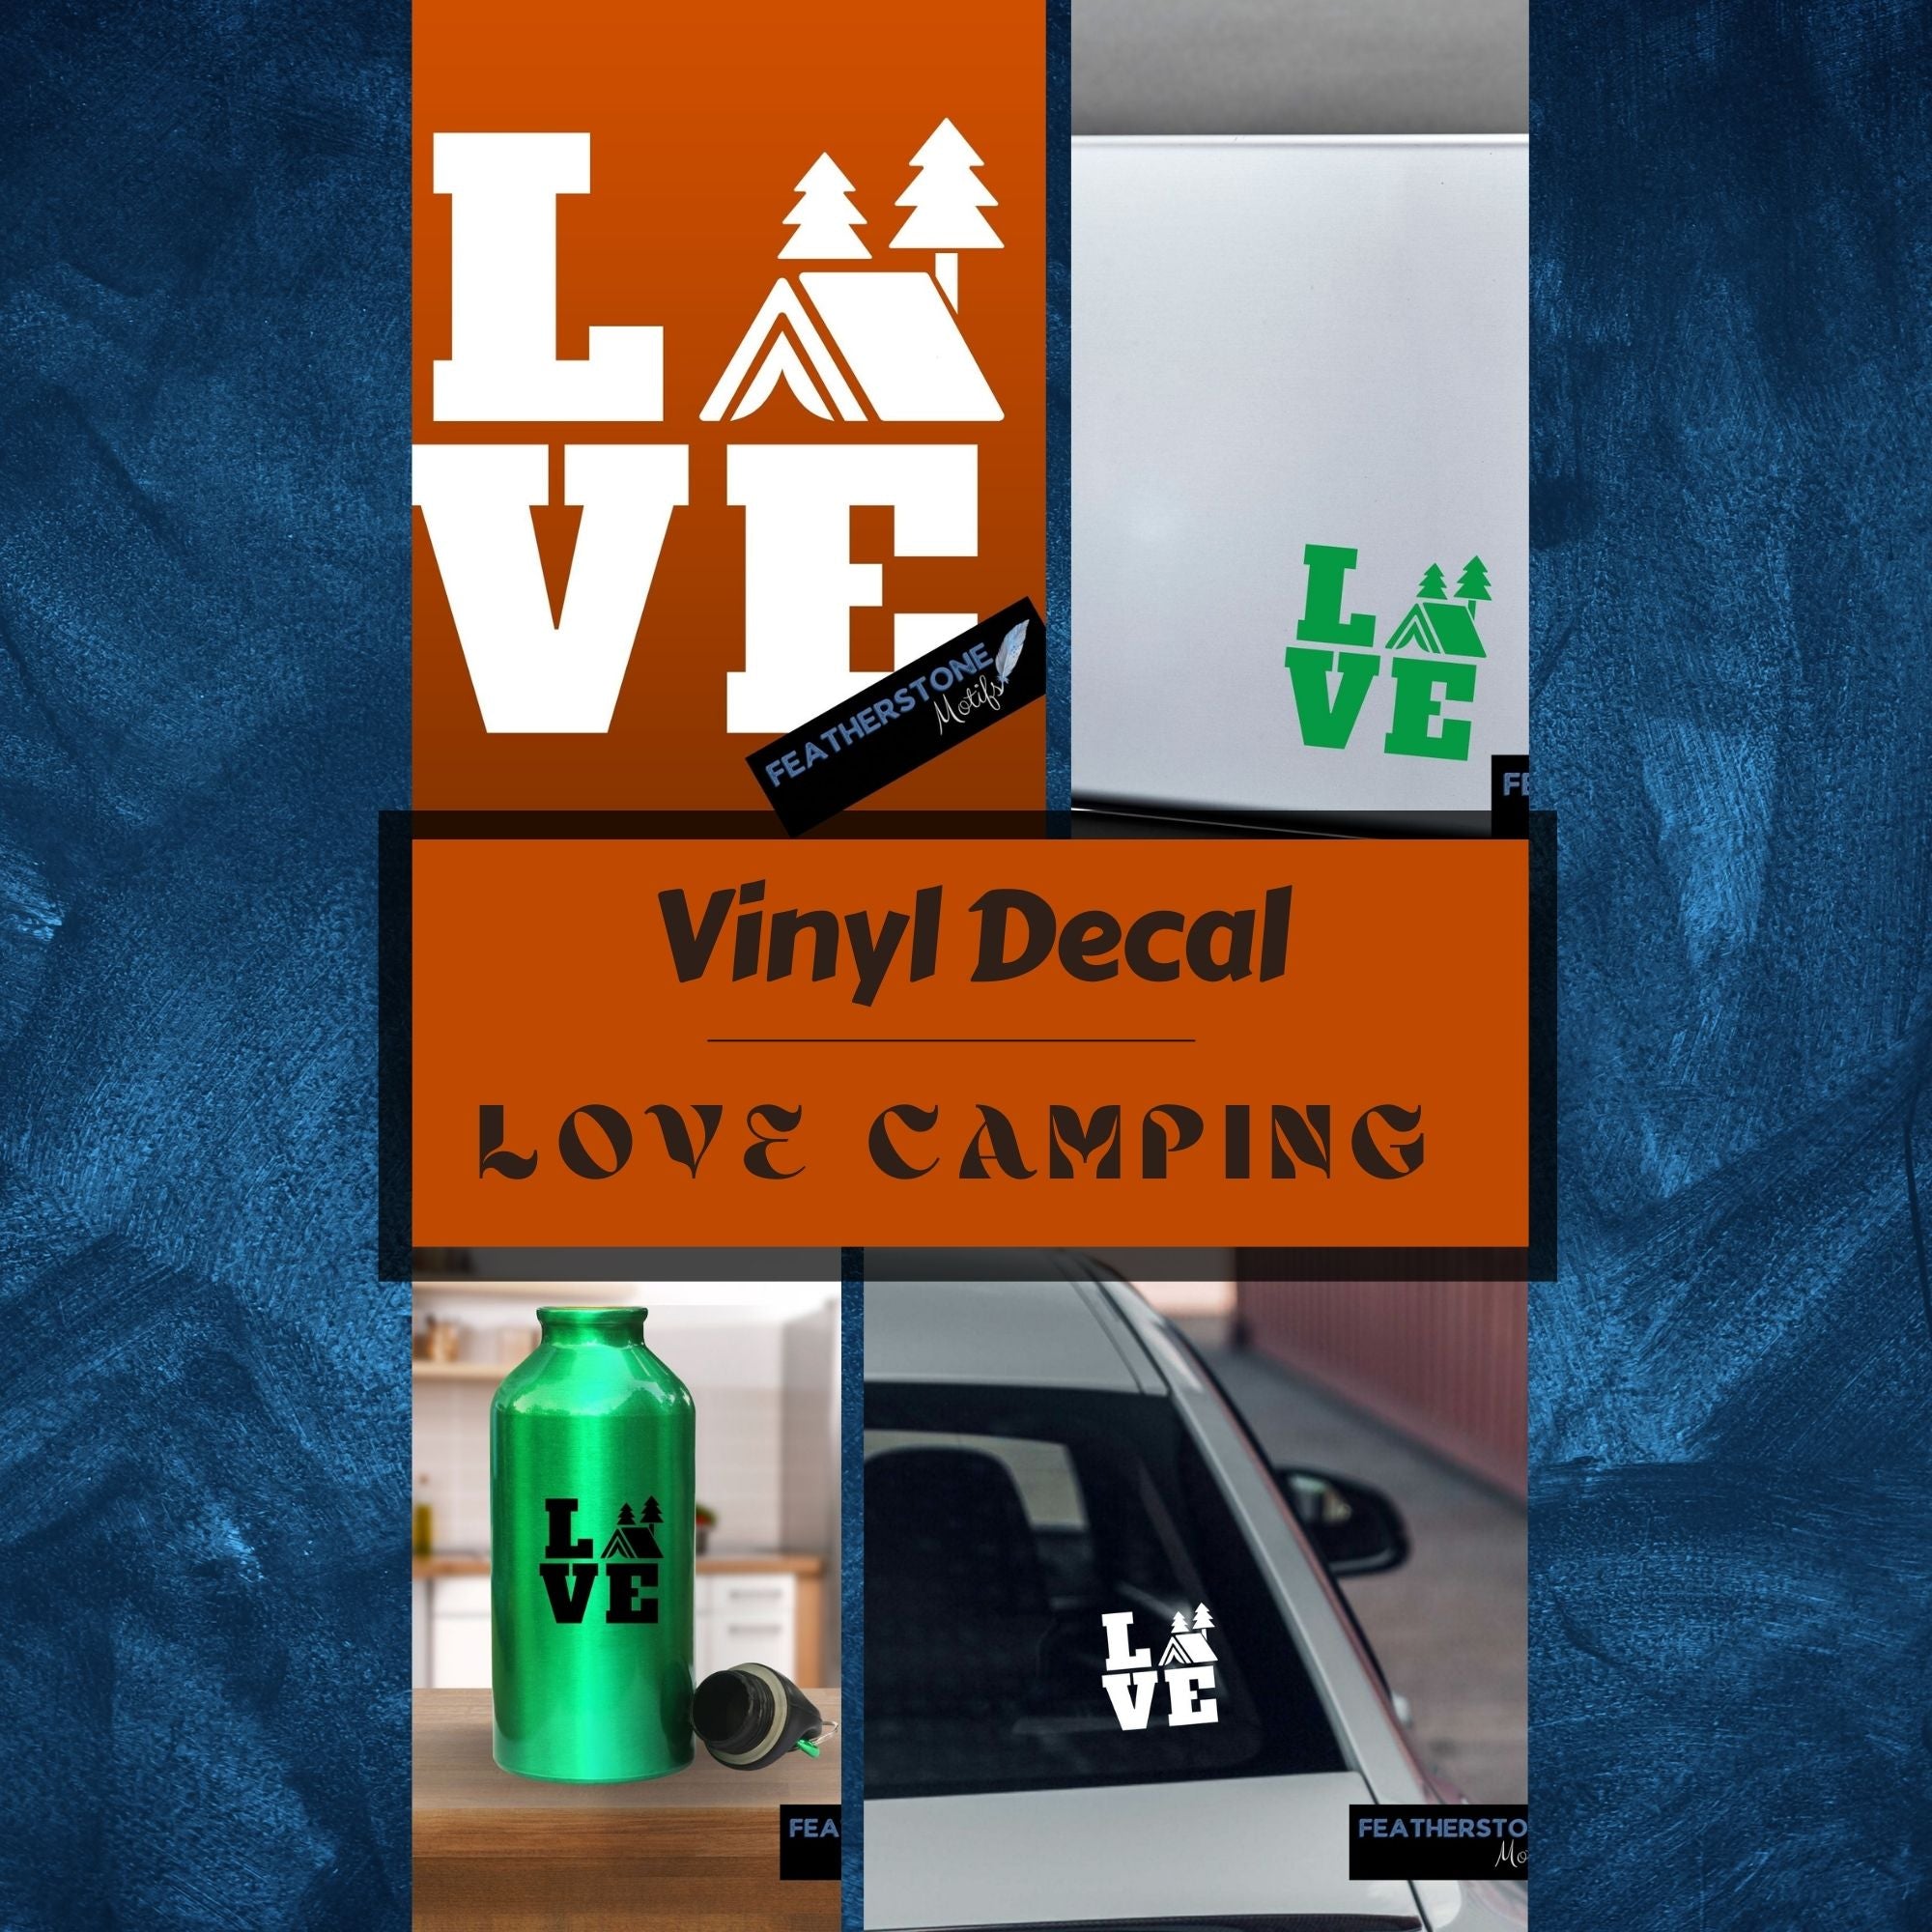 Love camping? Then show it with this camping themed love square vinyl decal! Available in 4 sizes and 10 colors, these vinyl decals make great gifts for everyone. This image shows the cover page.